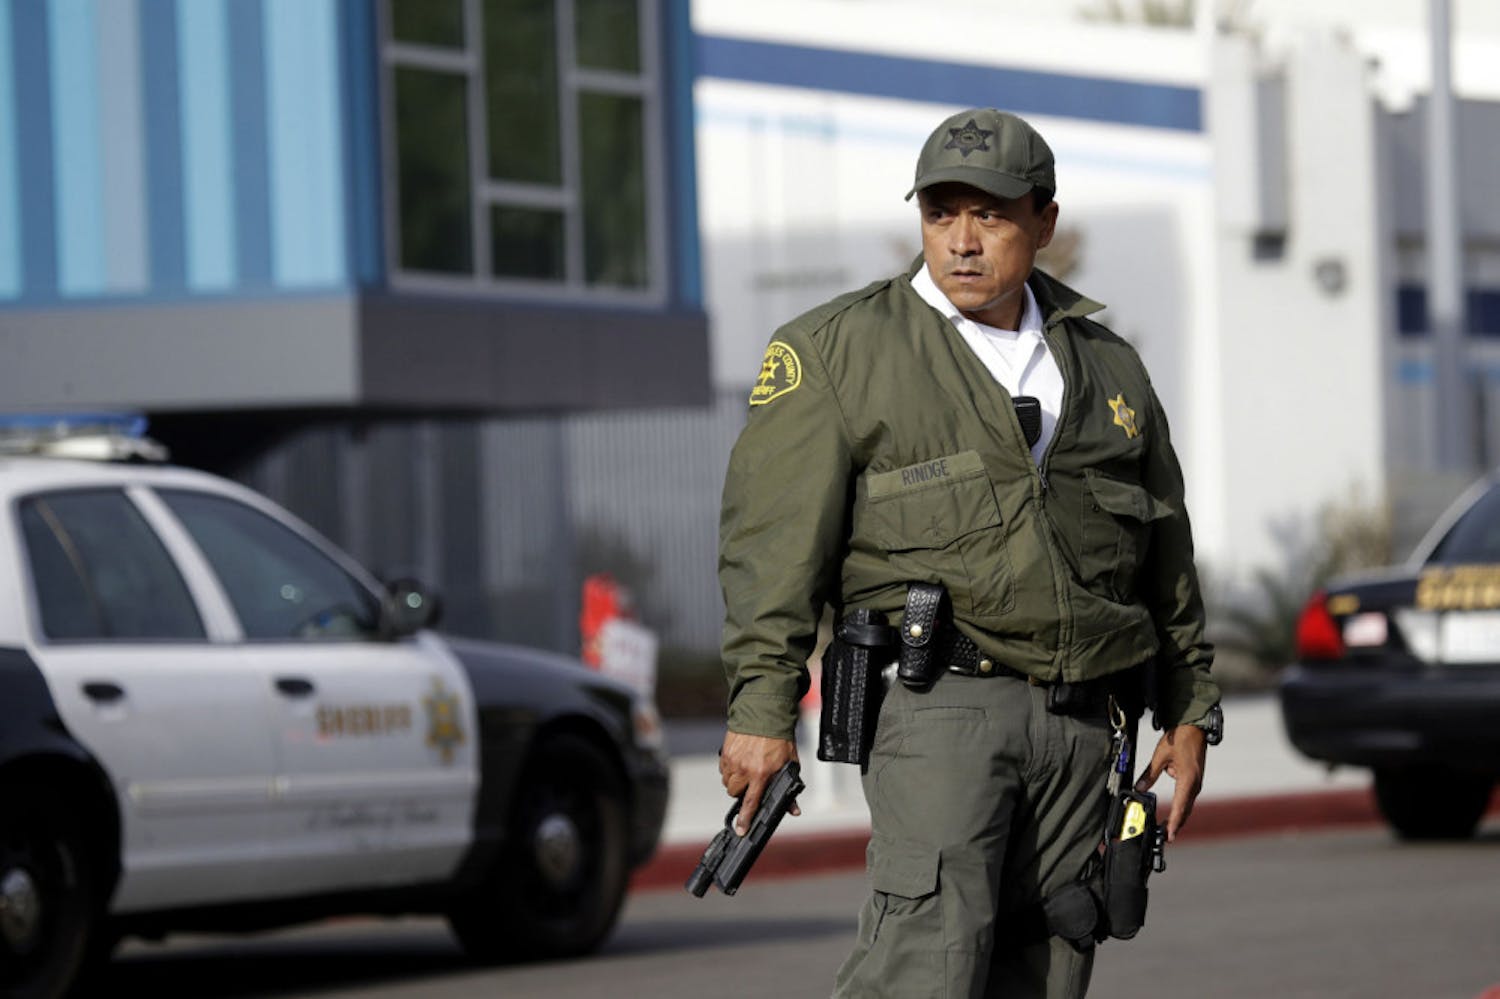 A member of the Los Angeles County Sheriff Department stands outside of Saugus High School with his weapon drawn after reports of a shooting on Thursday, Nov. 14, 2019, in Santa Clarita, Calif. (AP Photo/Marcio Jose Sanchez)